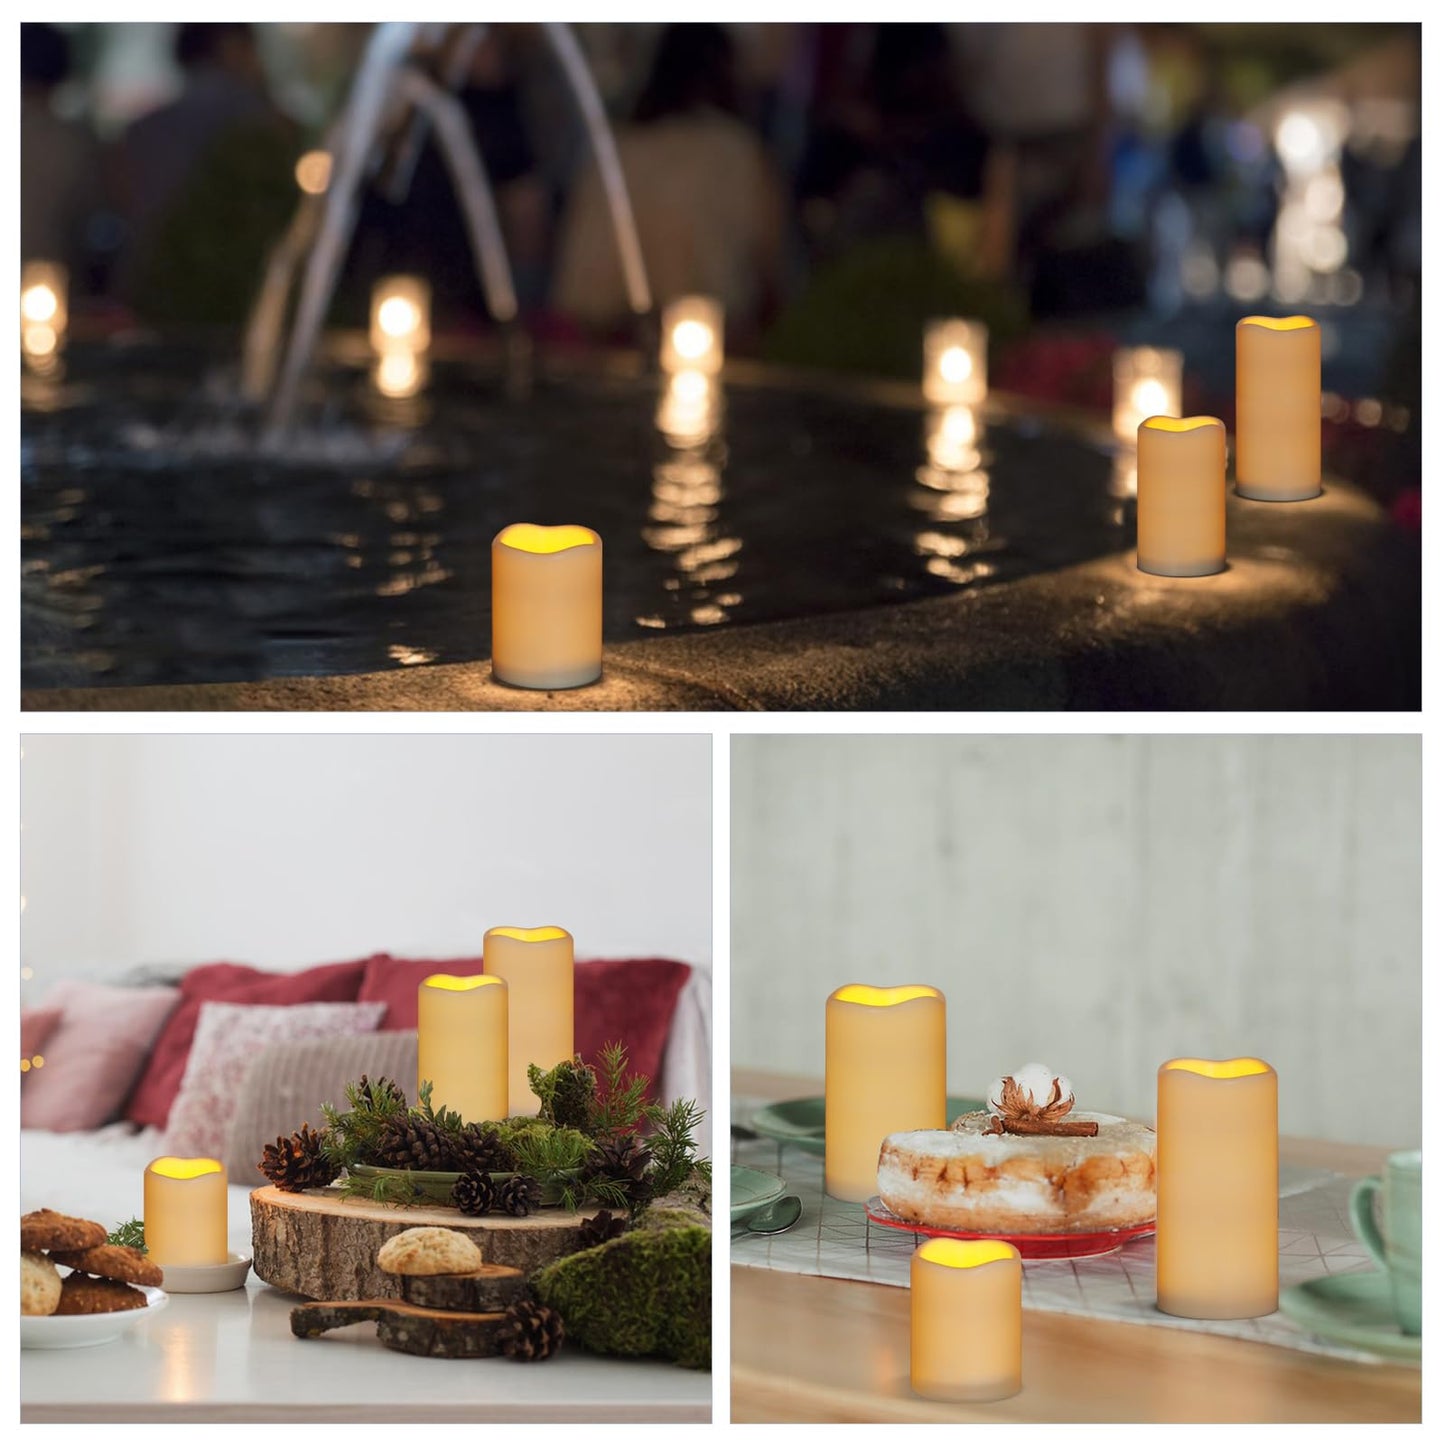 Artmarry Flameless Candles 4" 5" 6" Set of 3 Ivory Outdoor Indoor Pillars 3" Diameter Battery Operated Flickering Candles Include 10-Key Remote Timer Function 400+ Hours by 2 AA Batteries